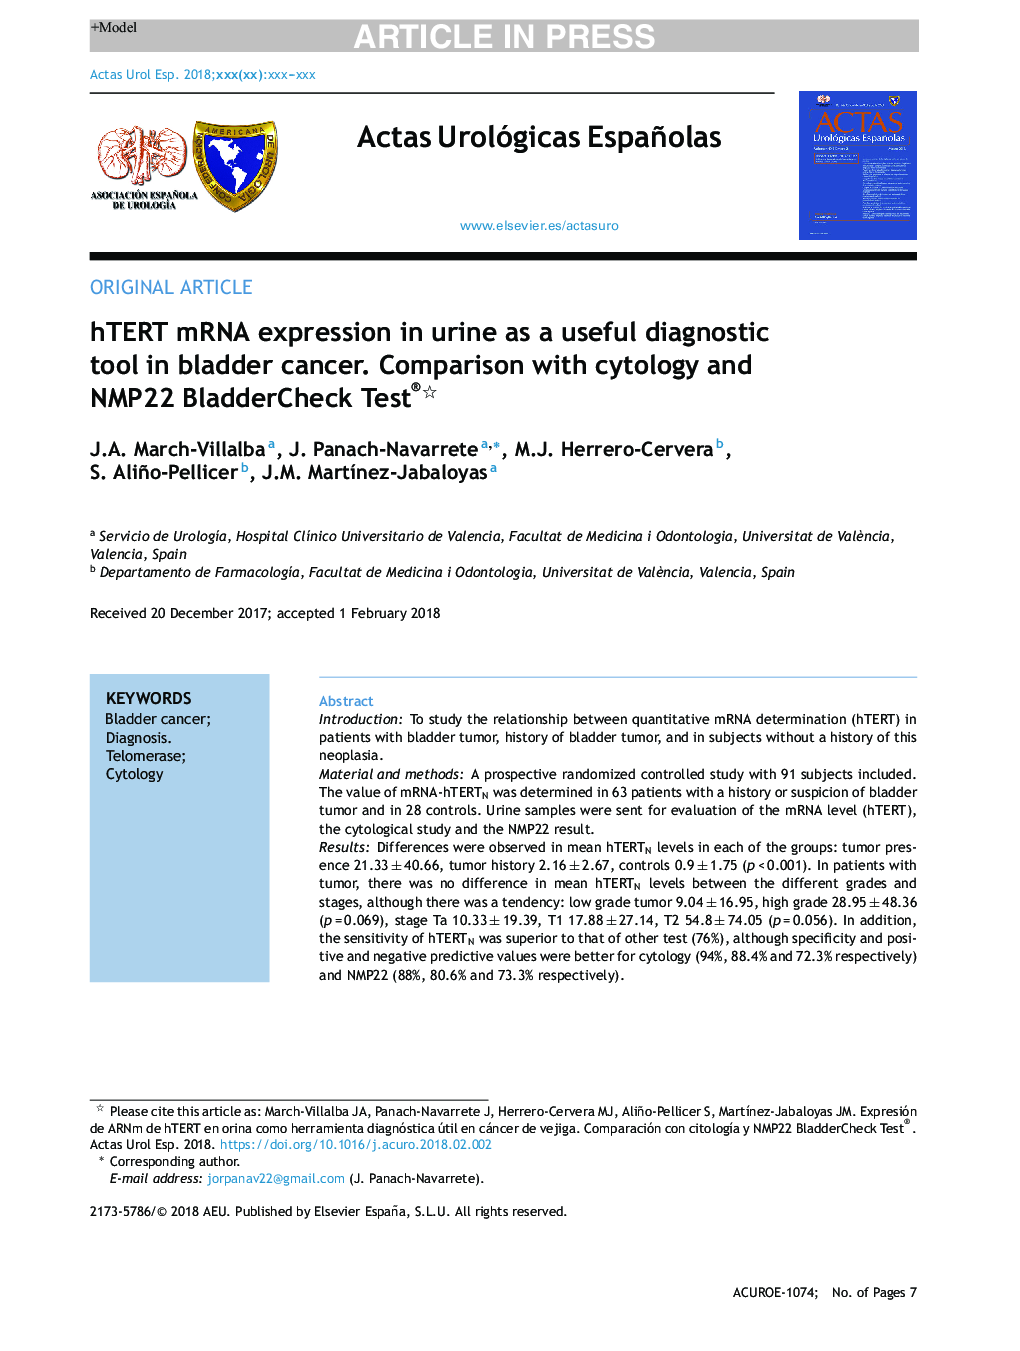 hTERT mRNA expression in urine as a useful diagnostic tool in bladder cancer. Comparison with cytology and NMP22 BladderCheck Test®